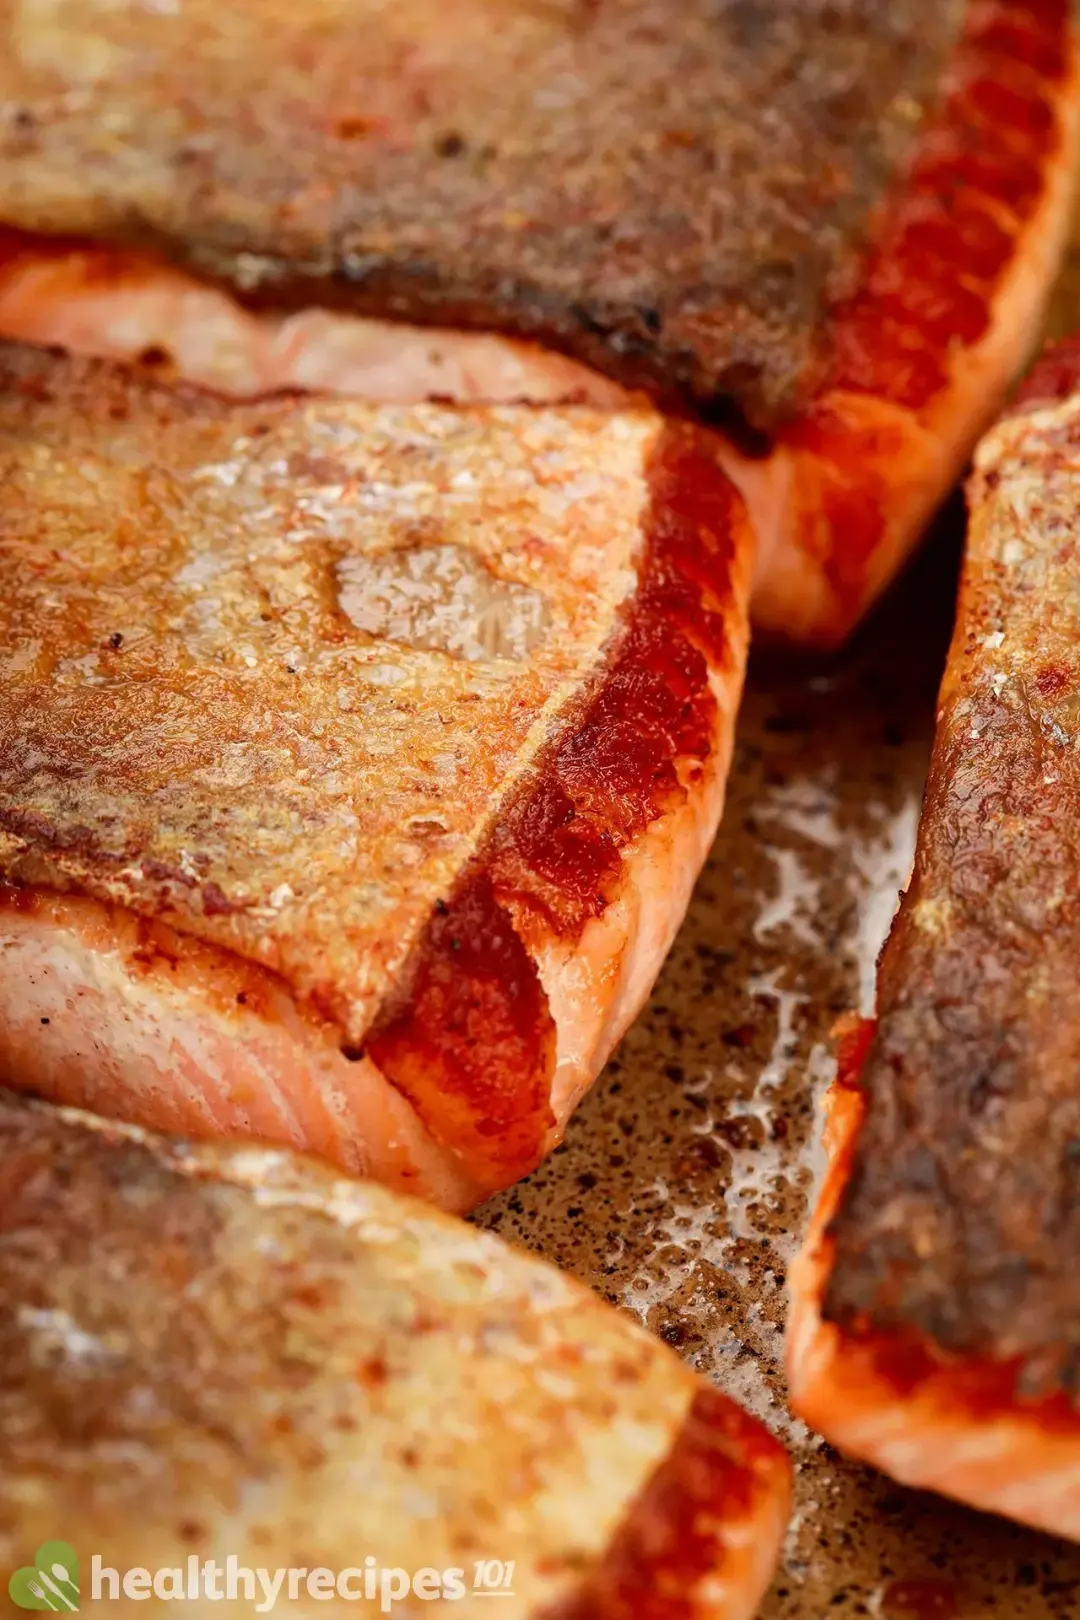 A close-up picture of crispy-skin salmon cooked on a non-stick pan